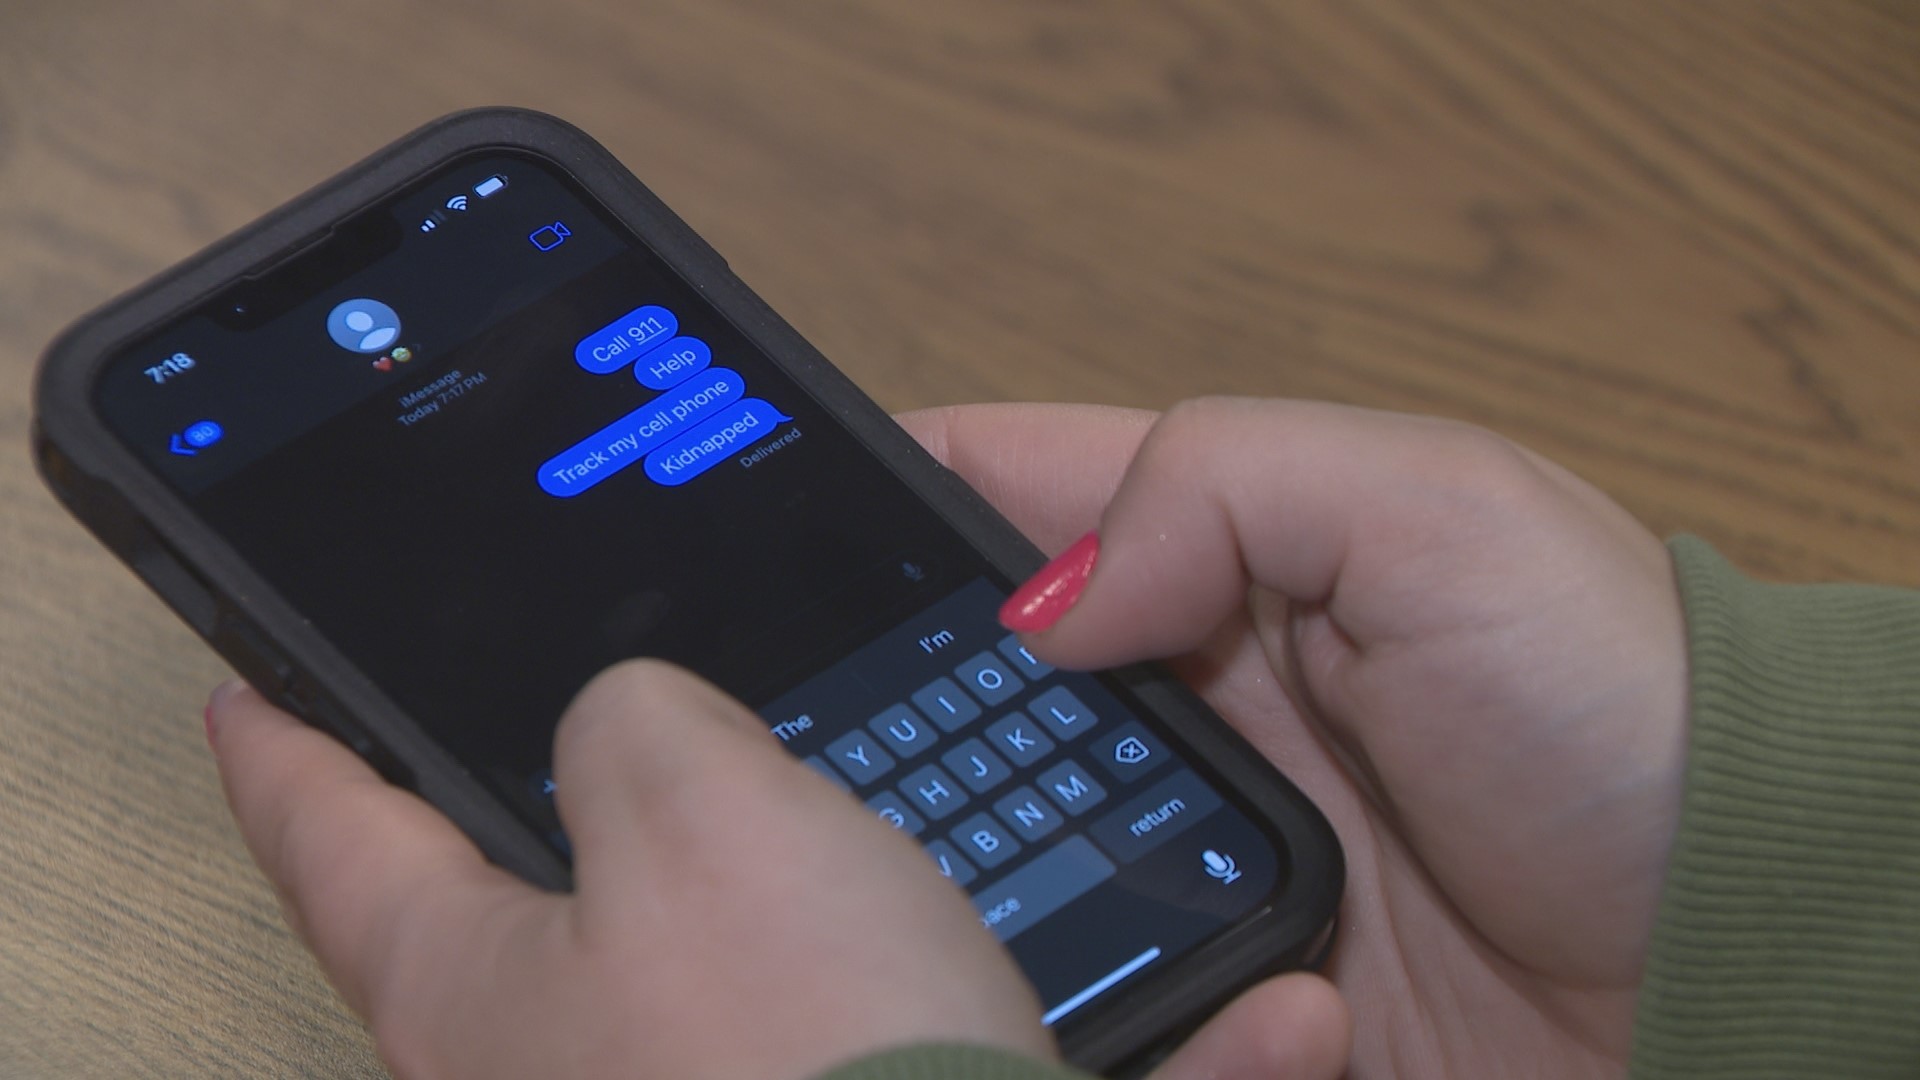 A new AI phone scam is targeting local parents. Get tips on how to navigate handling a potential scam call that uses artificial intelligence of a loved one's voice.